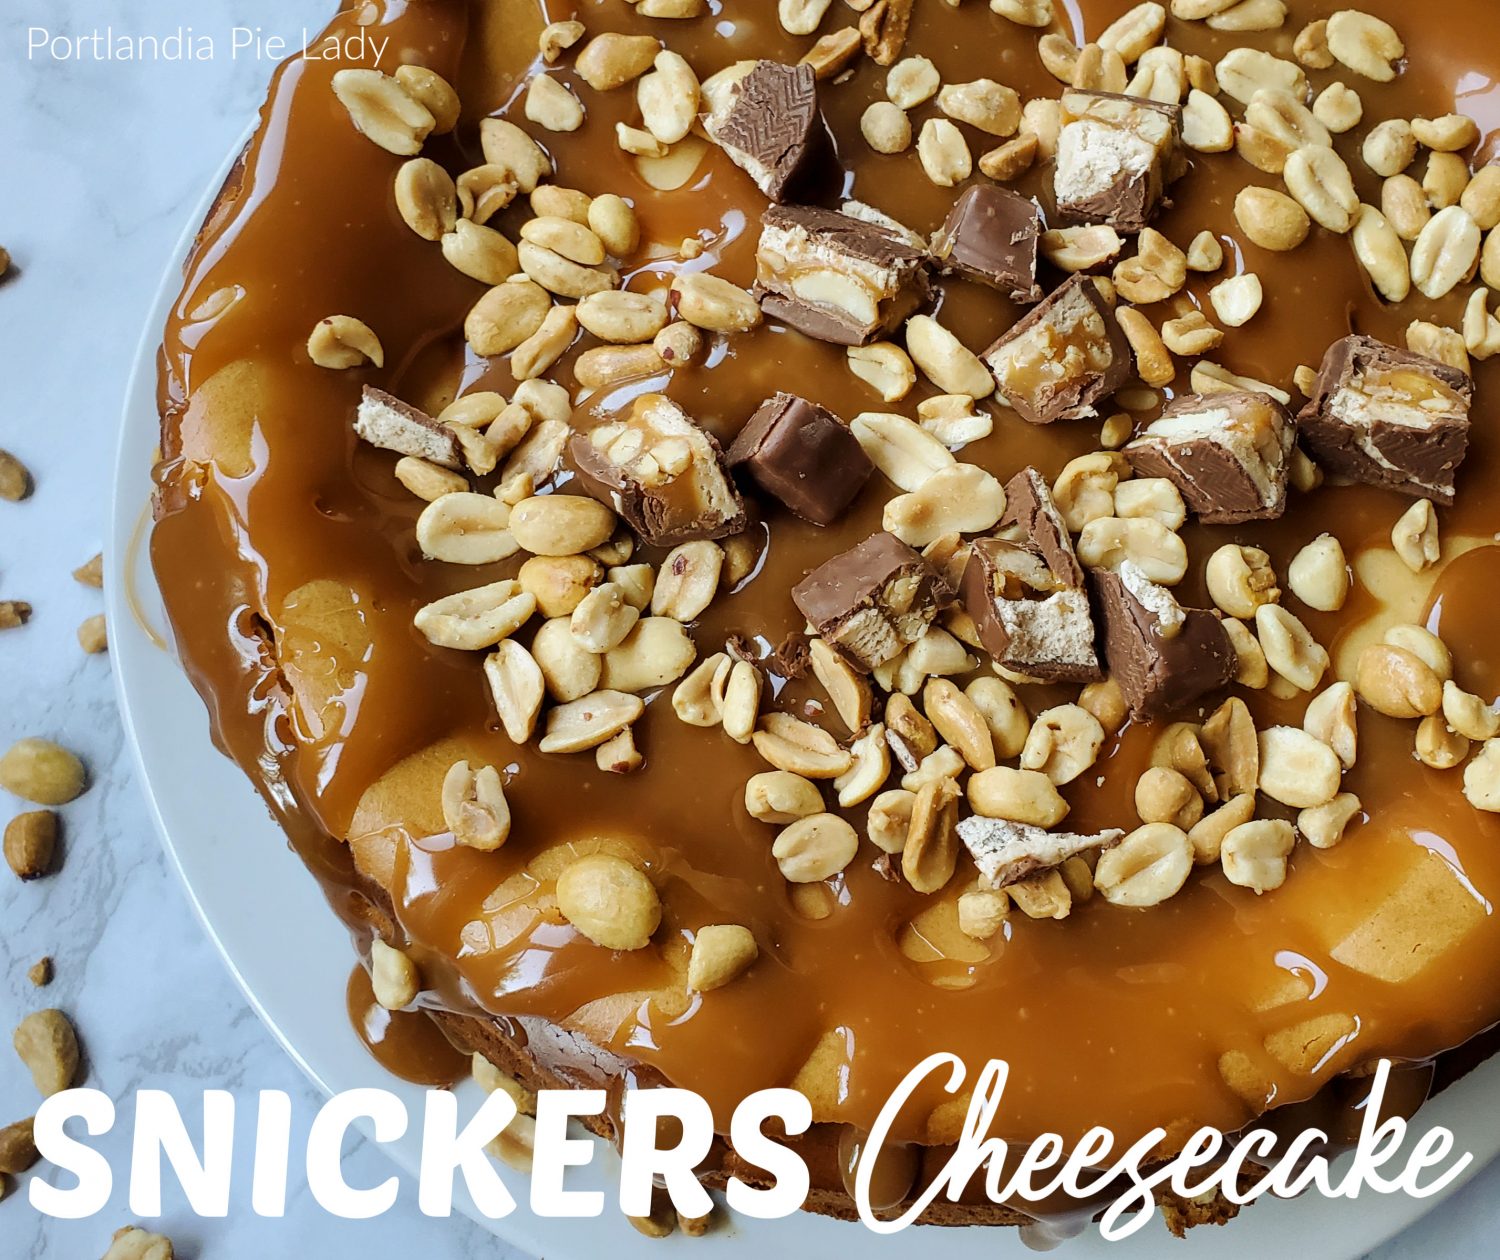 Snickers Cheescake, peanuty flavored filling loaded with Snickers and topped off with salted caramel sauce and roasted peanuts.  Dessert is great tonight!